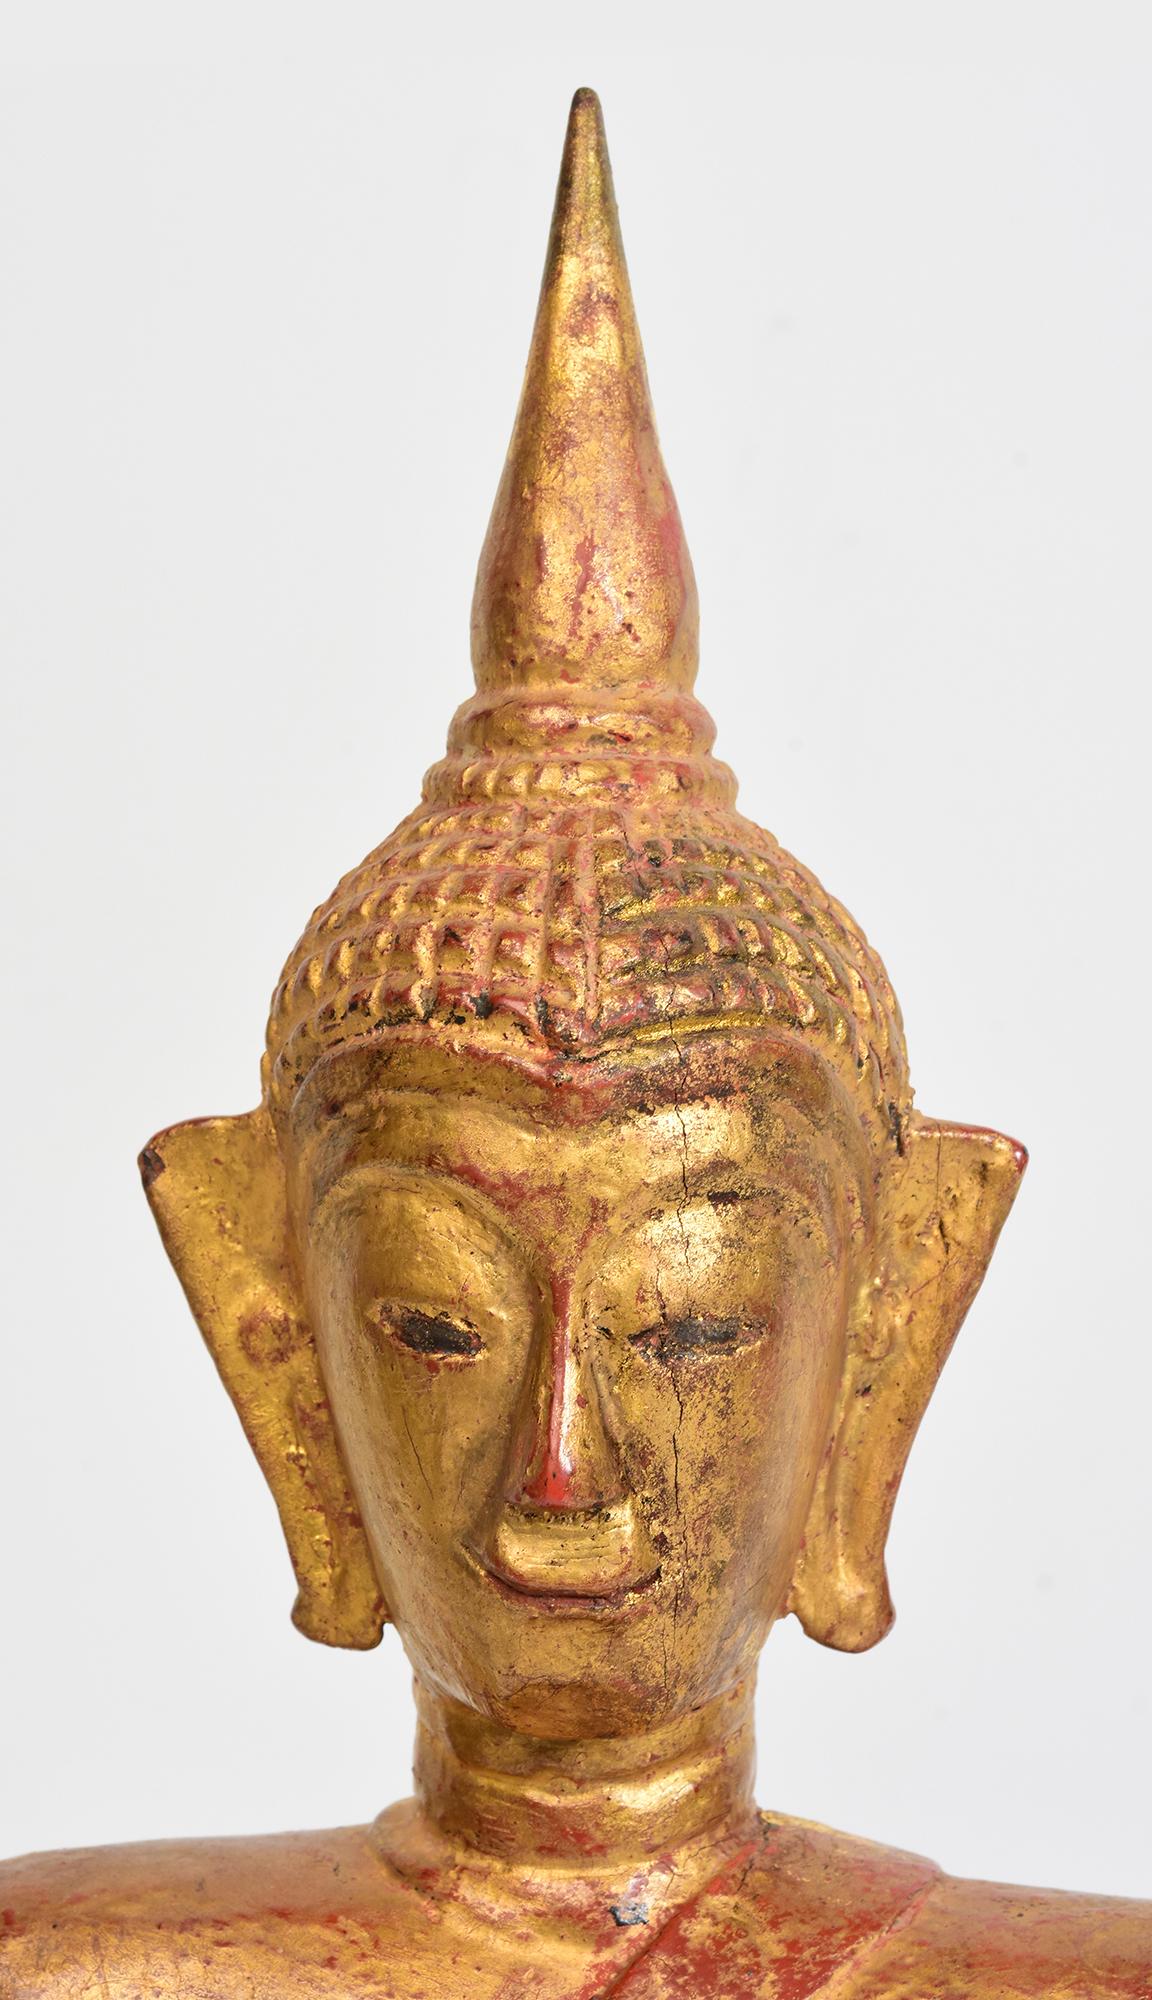 Lanna Thai wooden Buddha sitting in Mara Vijaya (calling the earth to witness) posture on a base, with gilded gold.

Age: Thailand, 19th Century
Size: Height 40.8 C.M. / Width 14 C.M. / Depth 12.1 C.M.
Condition: Nice condition overall (some